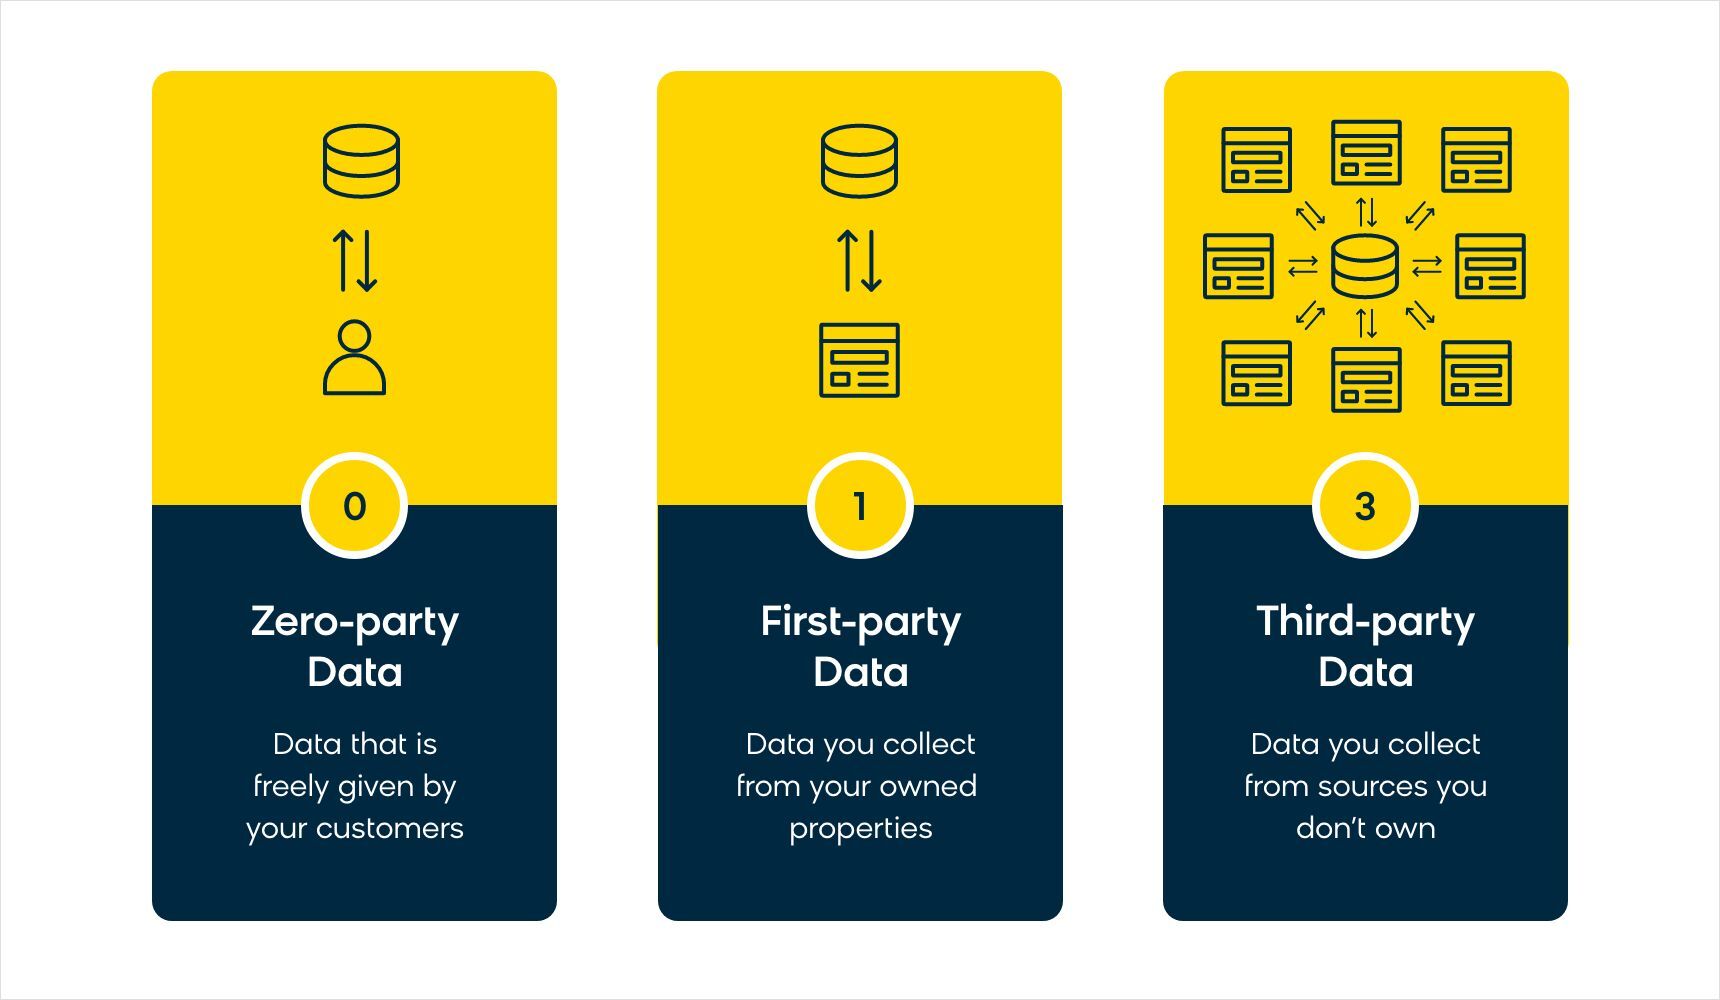 A graphic showing the differences between Zero-Party Data, First-Party Data, and Third-Party Data.